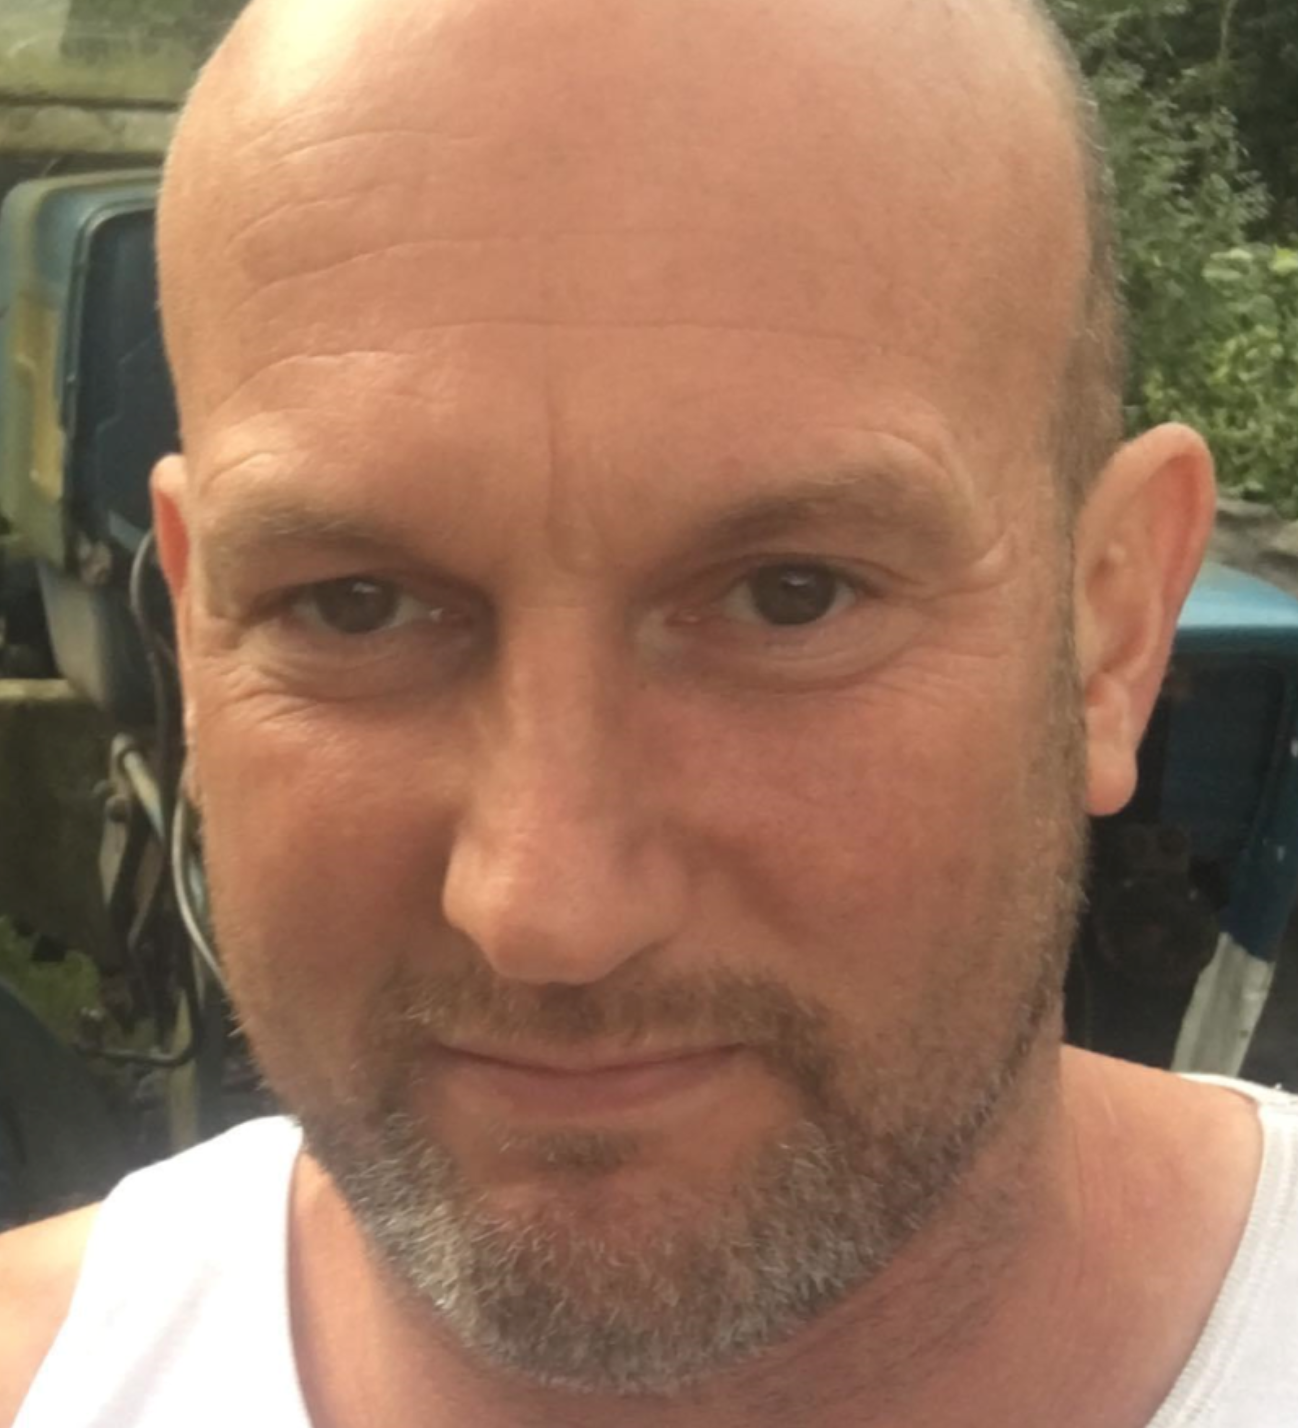 Gwent Police appeal to find missing man from Abertysswg area